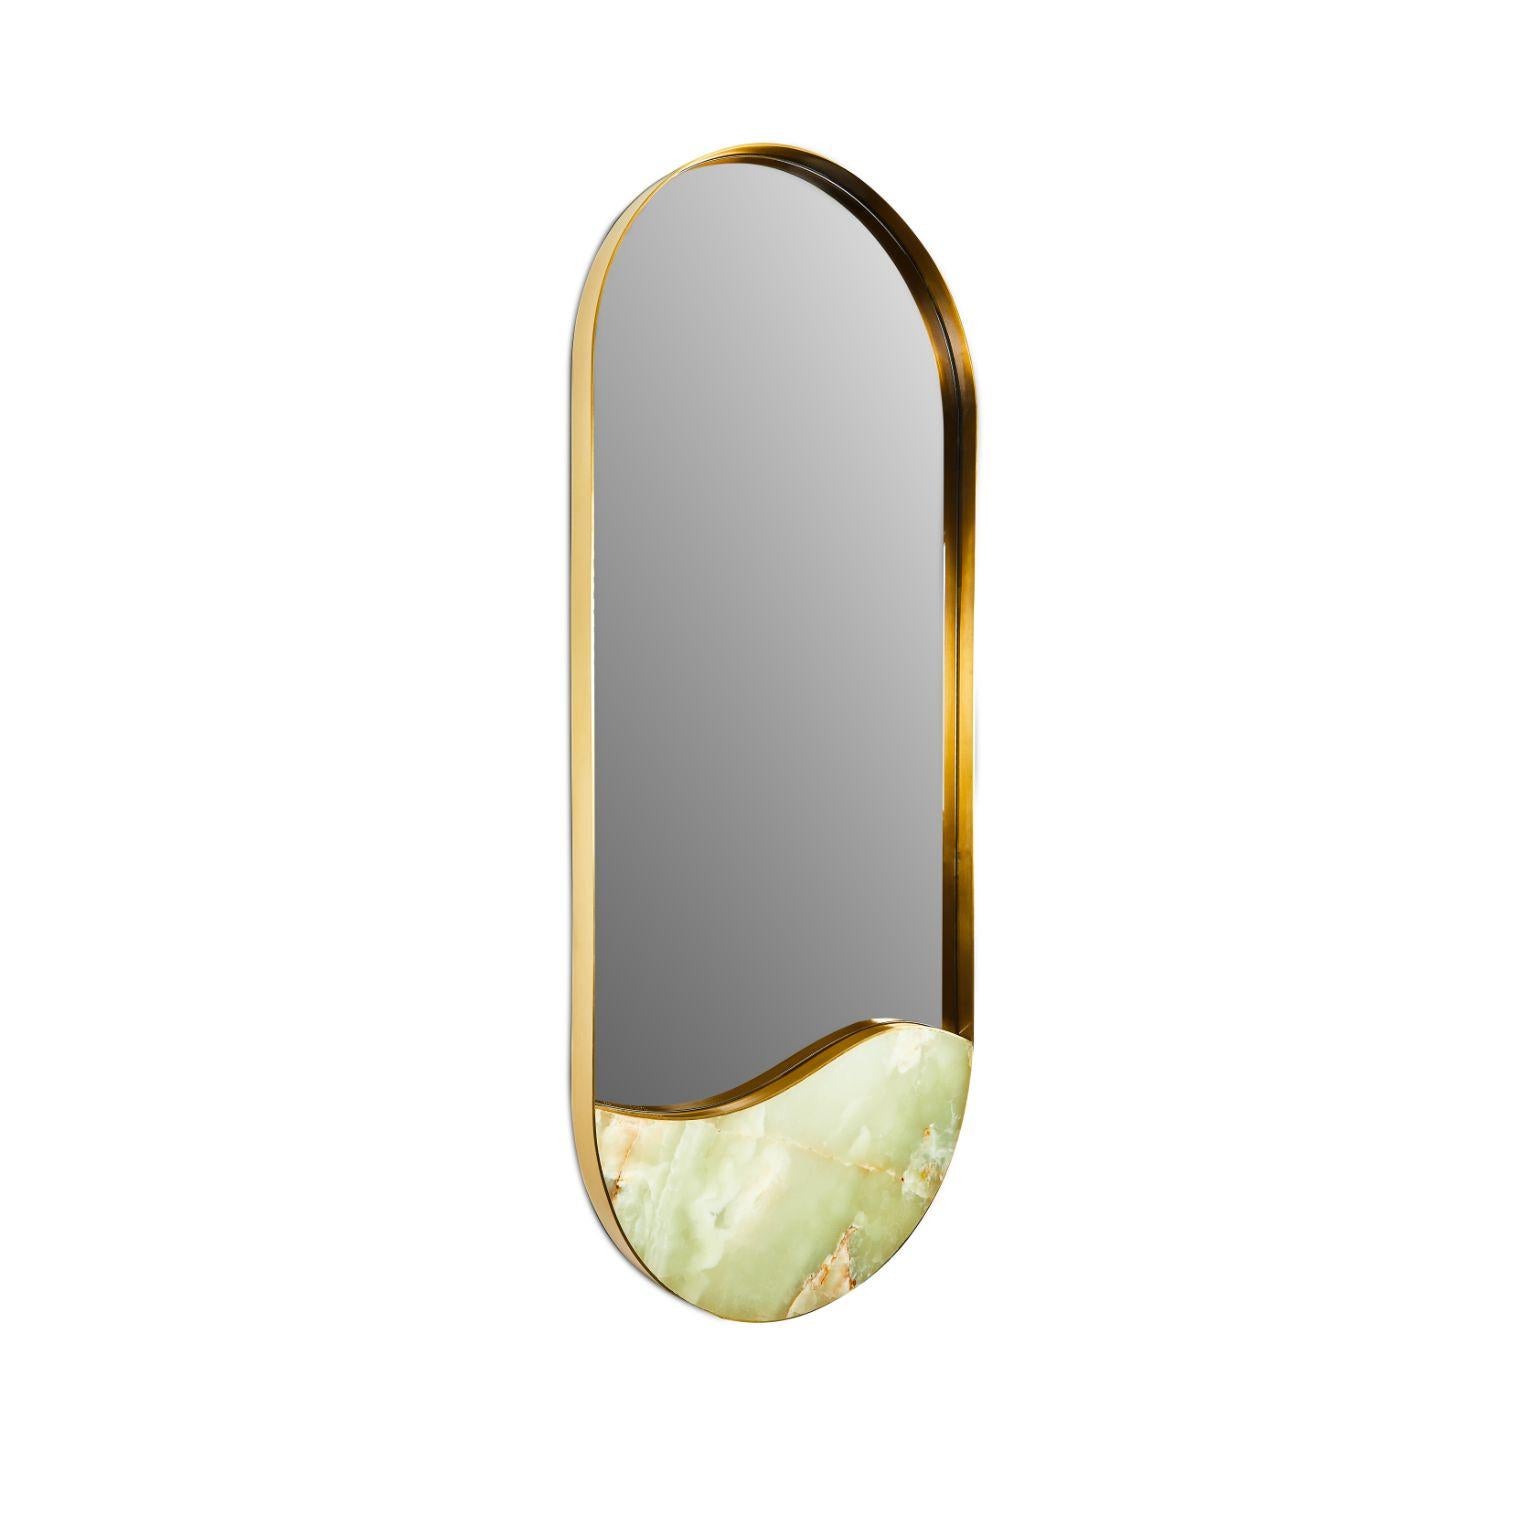 Kura mirror, green onyx, by Marble Balloon
Dimensions: 120 x 50 x 5 cm 
Materials: Brass, onyx green stone.

100% Brass material is used in the frame and green onyx stone is used in the lower part.

Marble Balloon is an interior design and high end